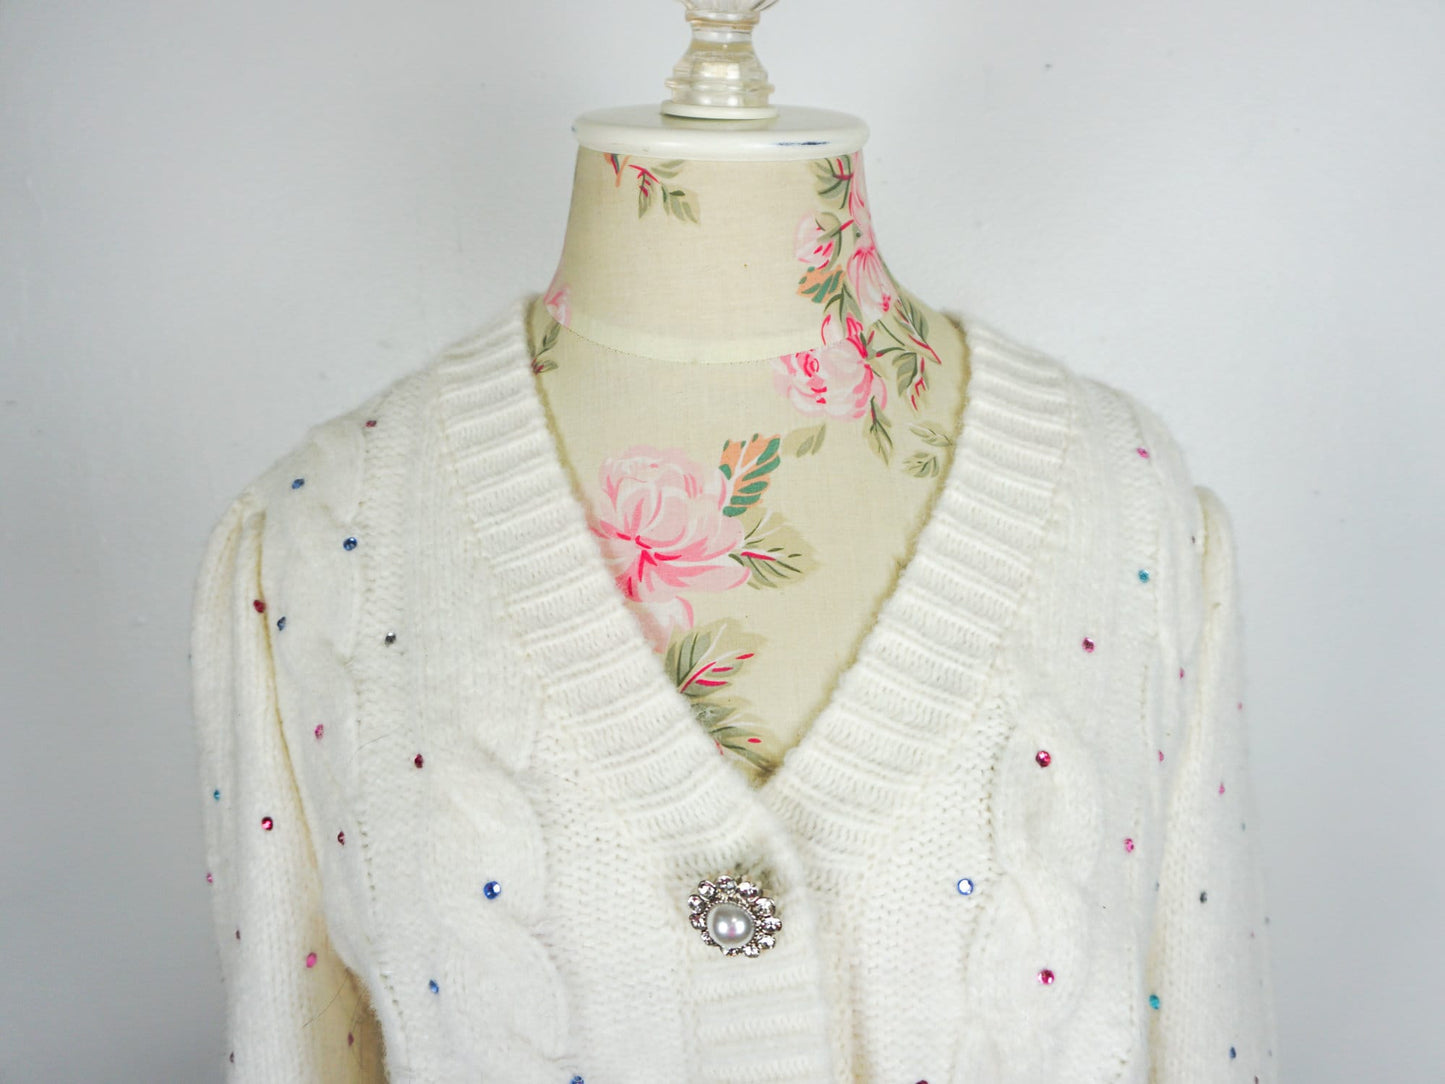 Bedazzled Sweater Retro, Size Large